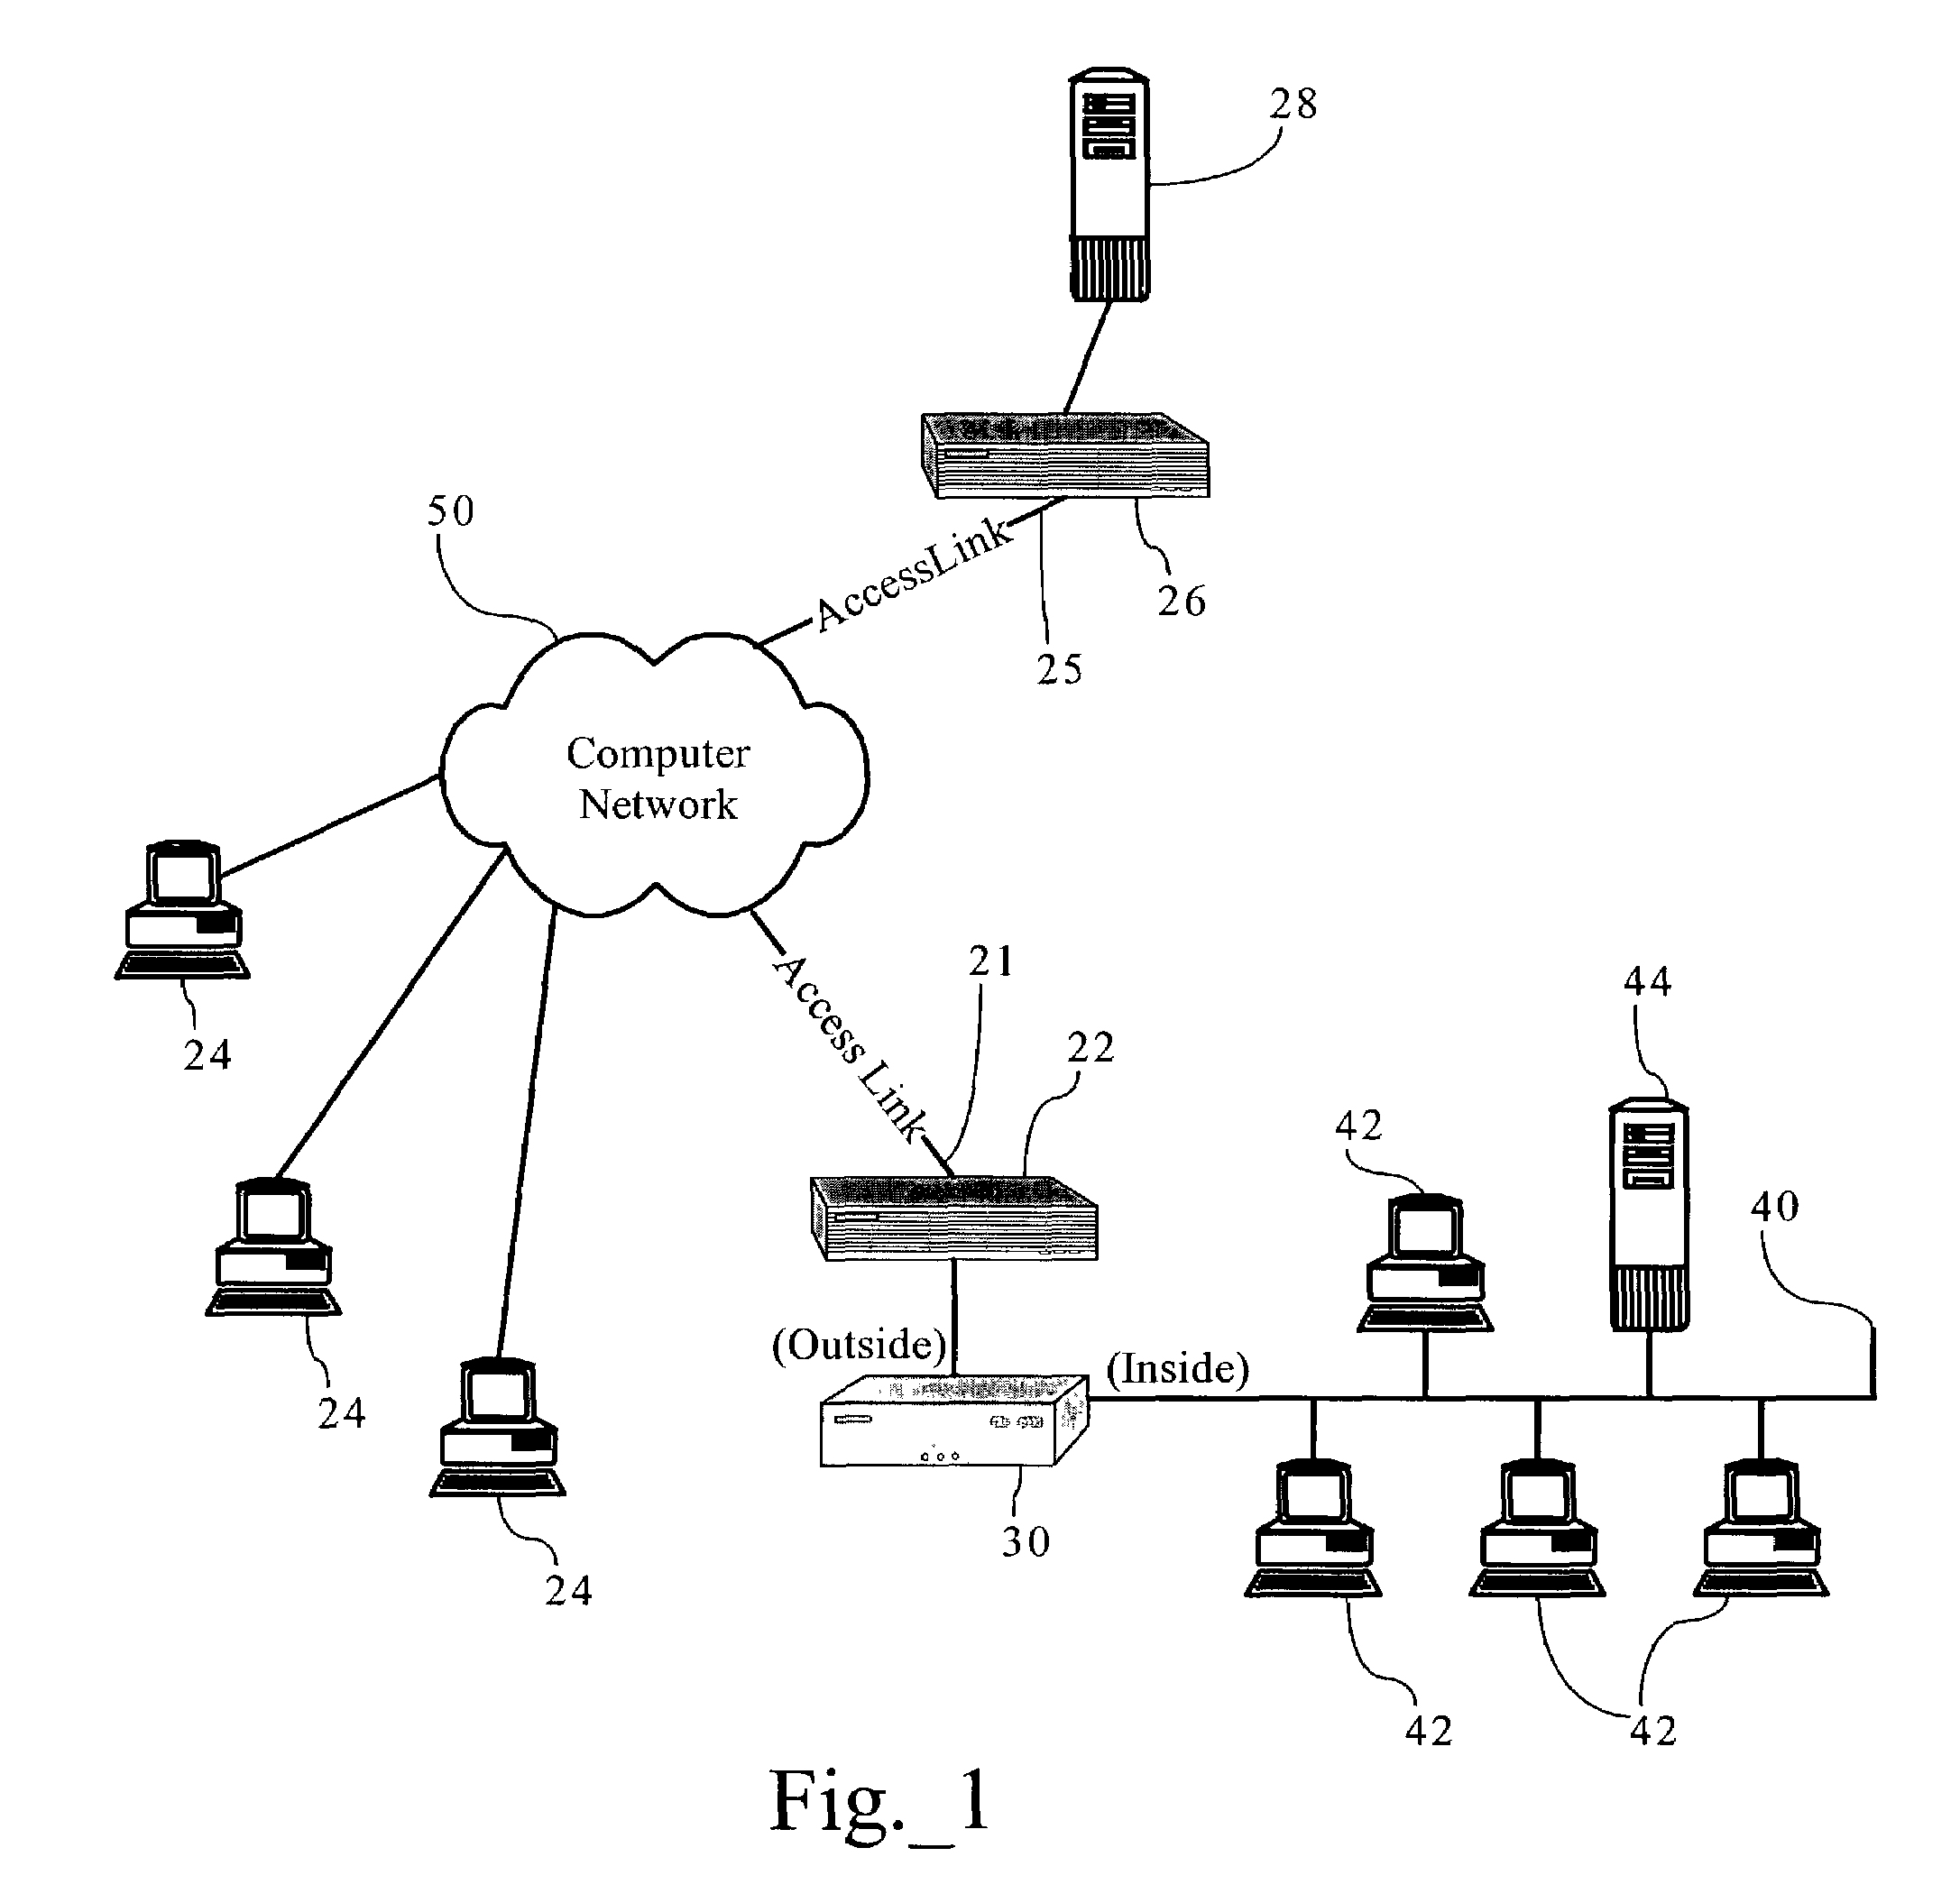 Classification data structure enabling multi-dimensional network traffic classification and control schemes